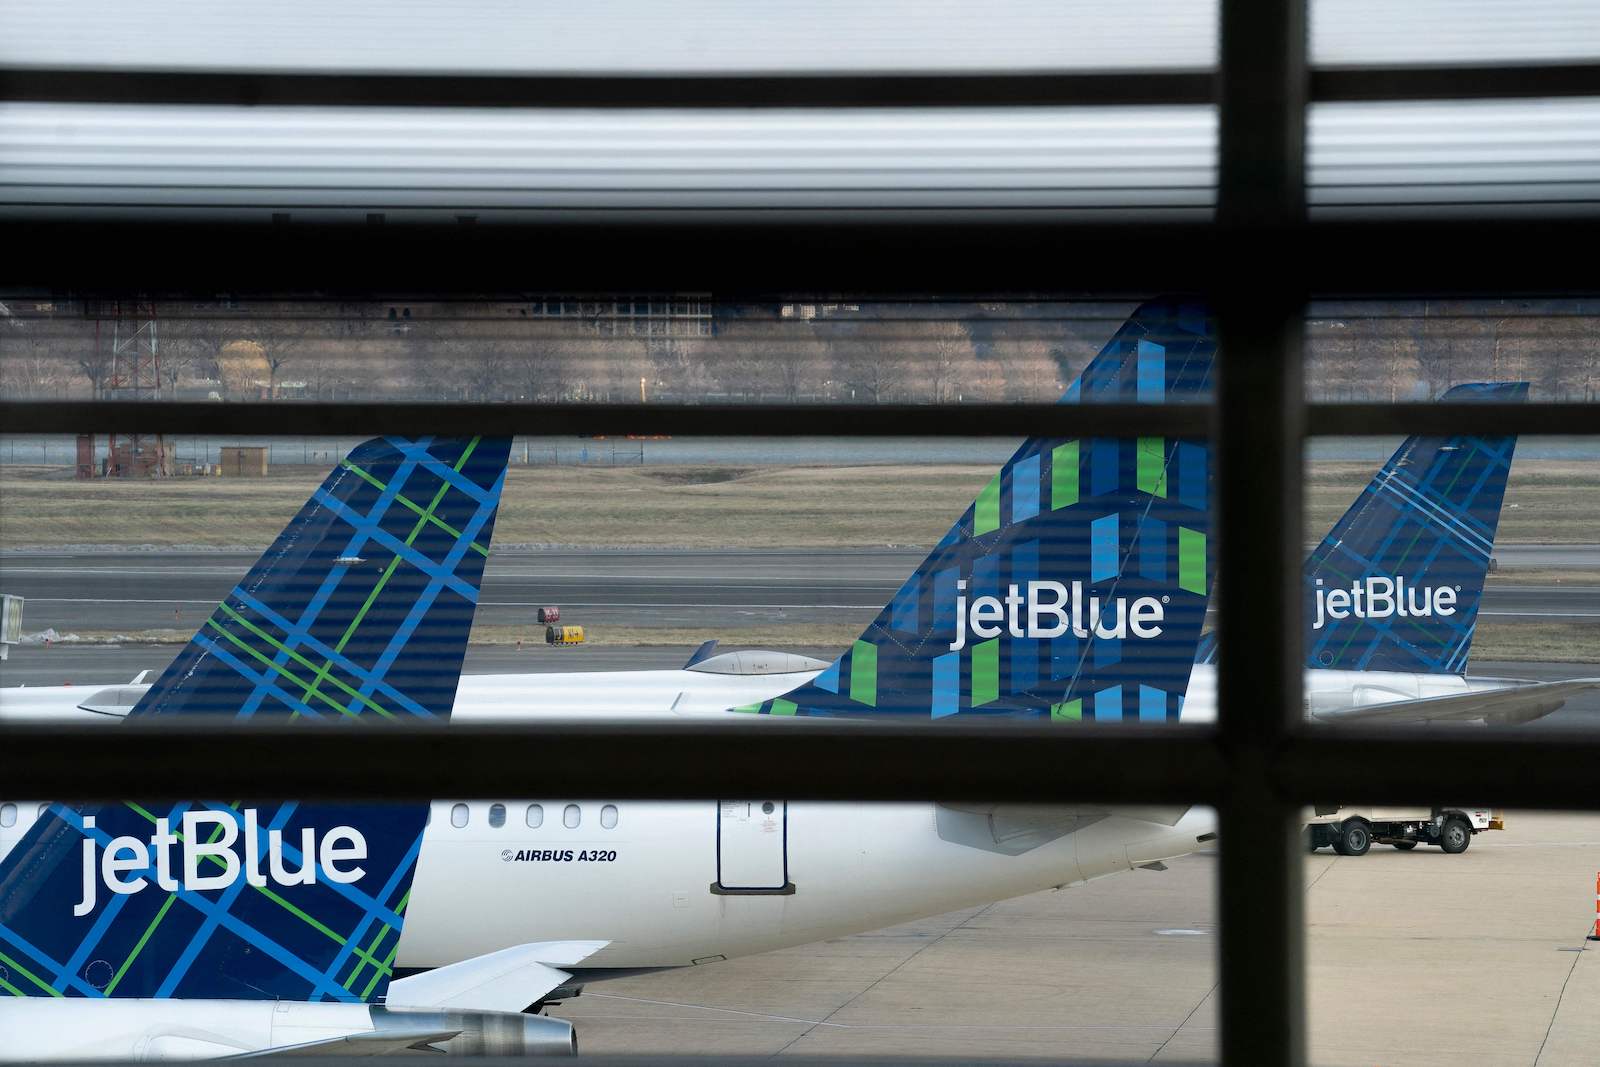 JetBlue's Big Winter Sale is back, with one-way fares starting at $39